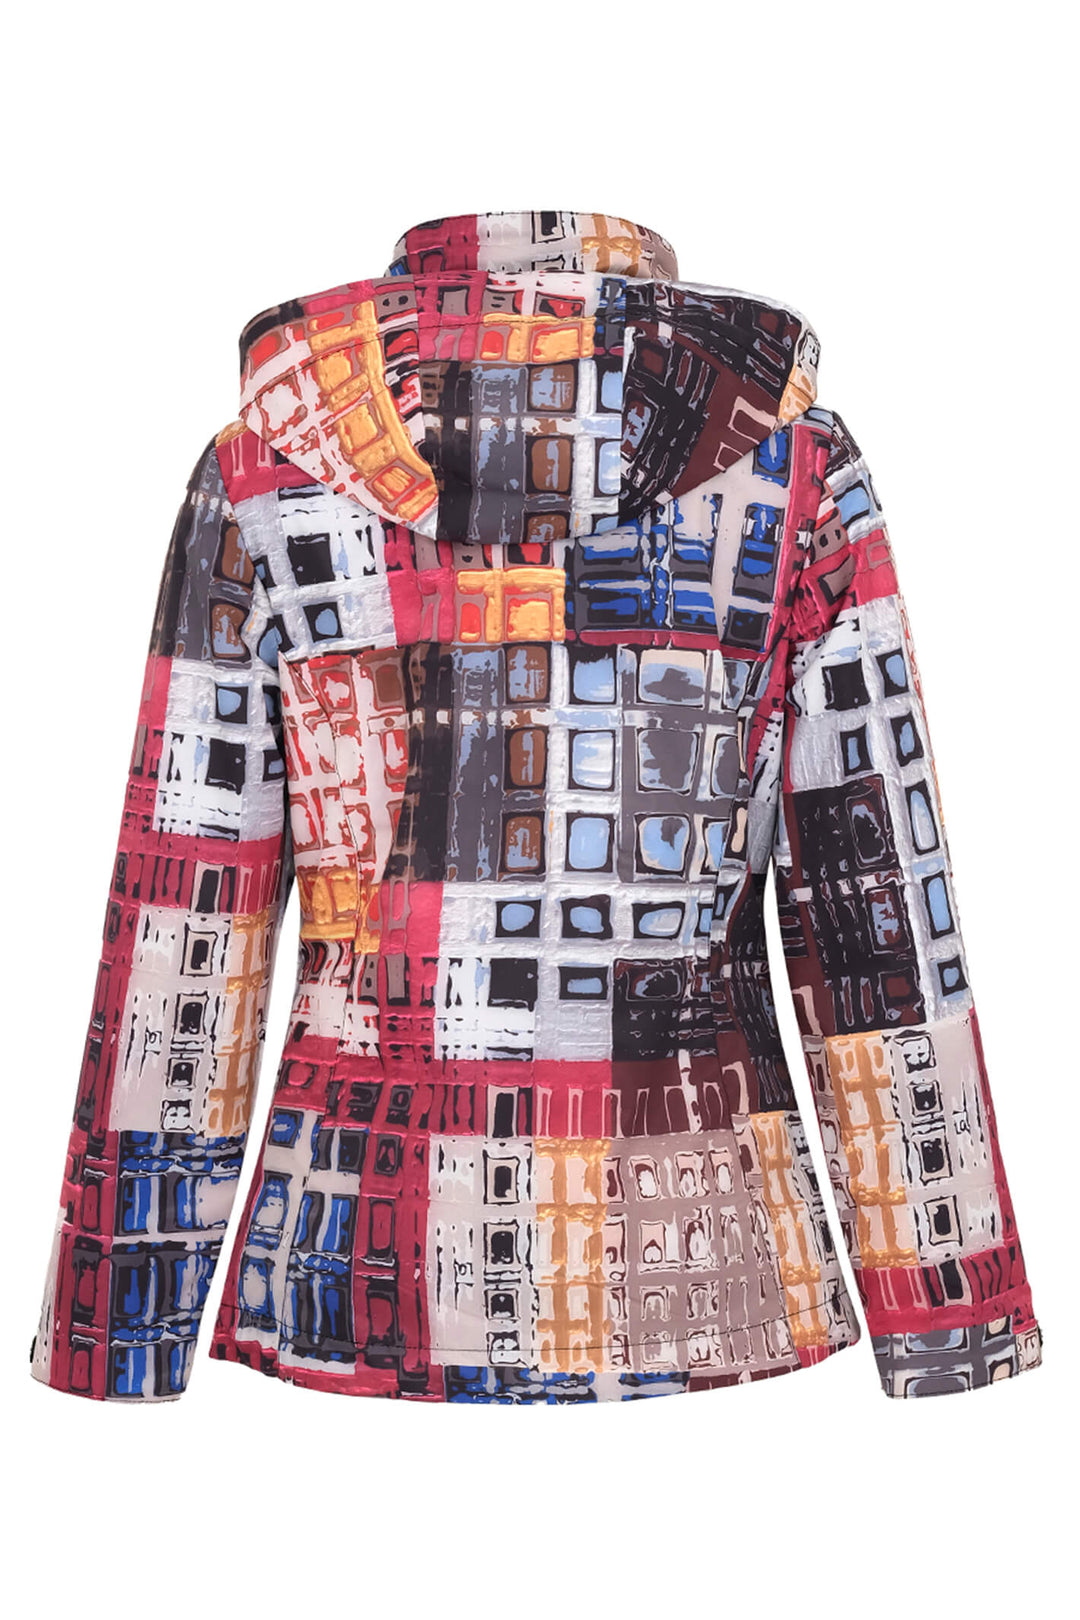 Dolcezza 73852 Red Marcus Akerman Print Hooded Coat - Experience Boutique